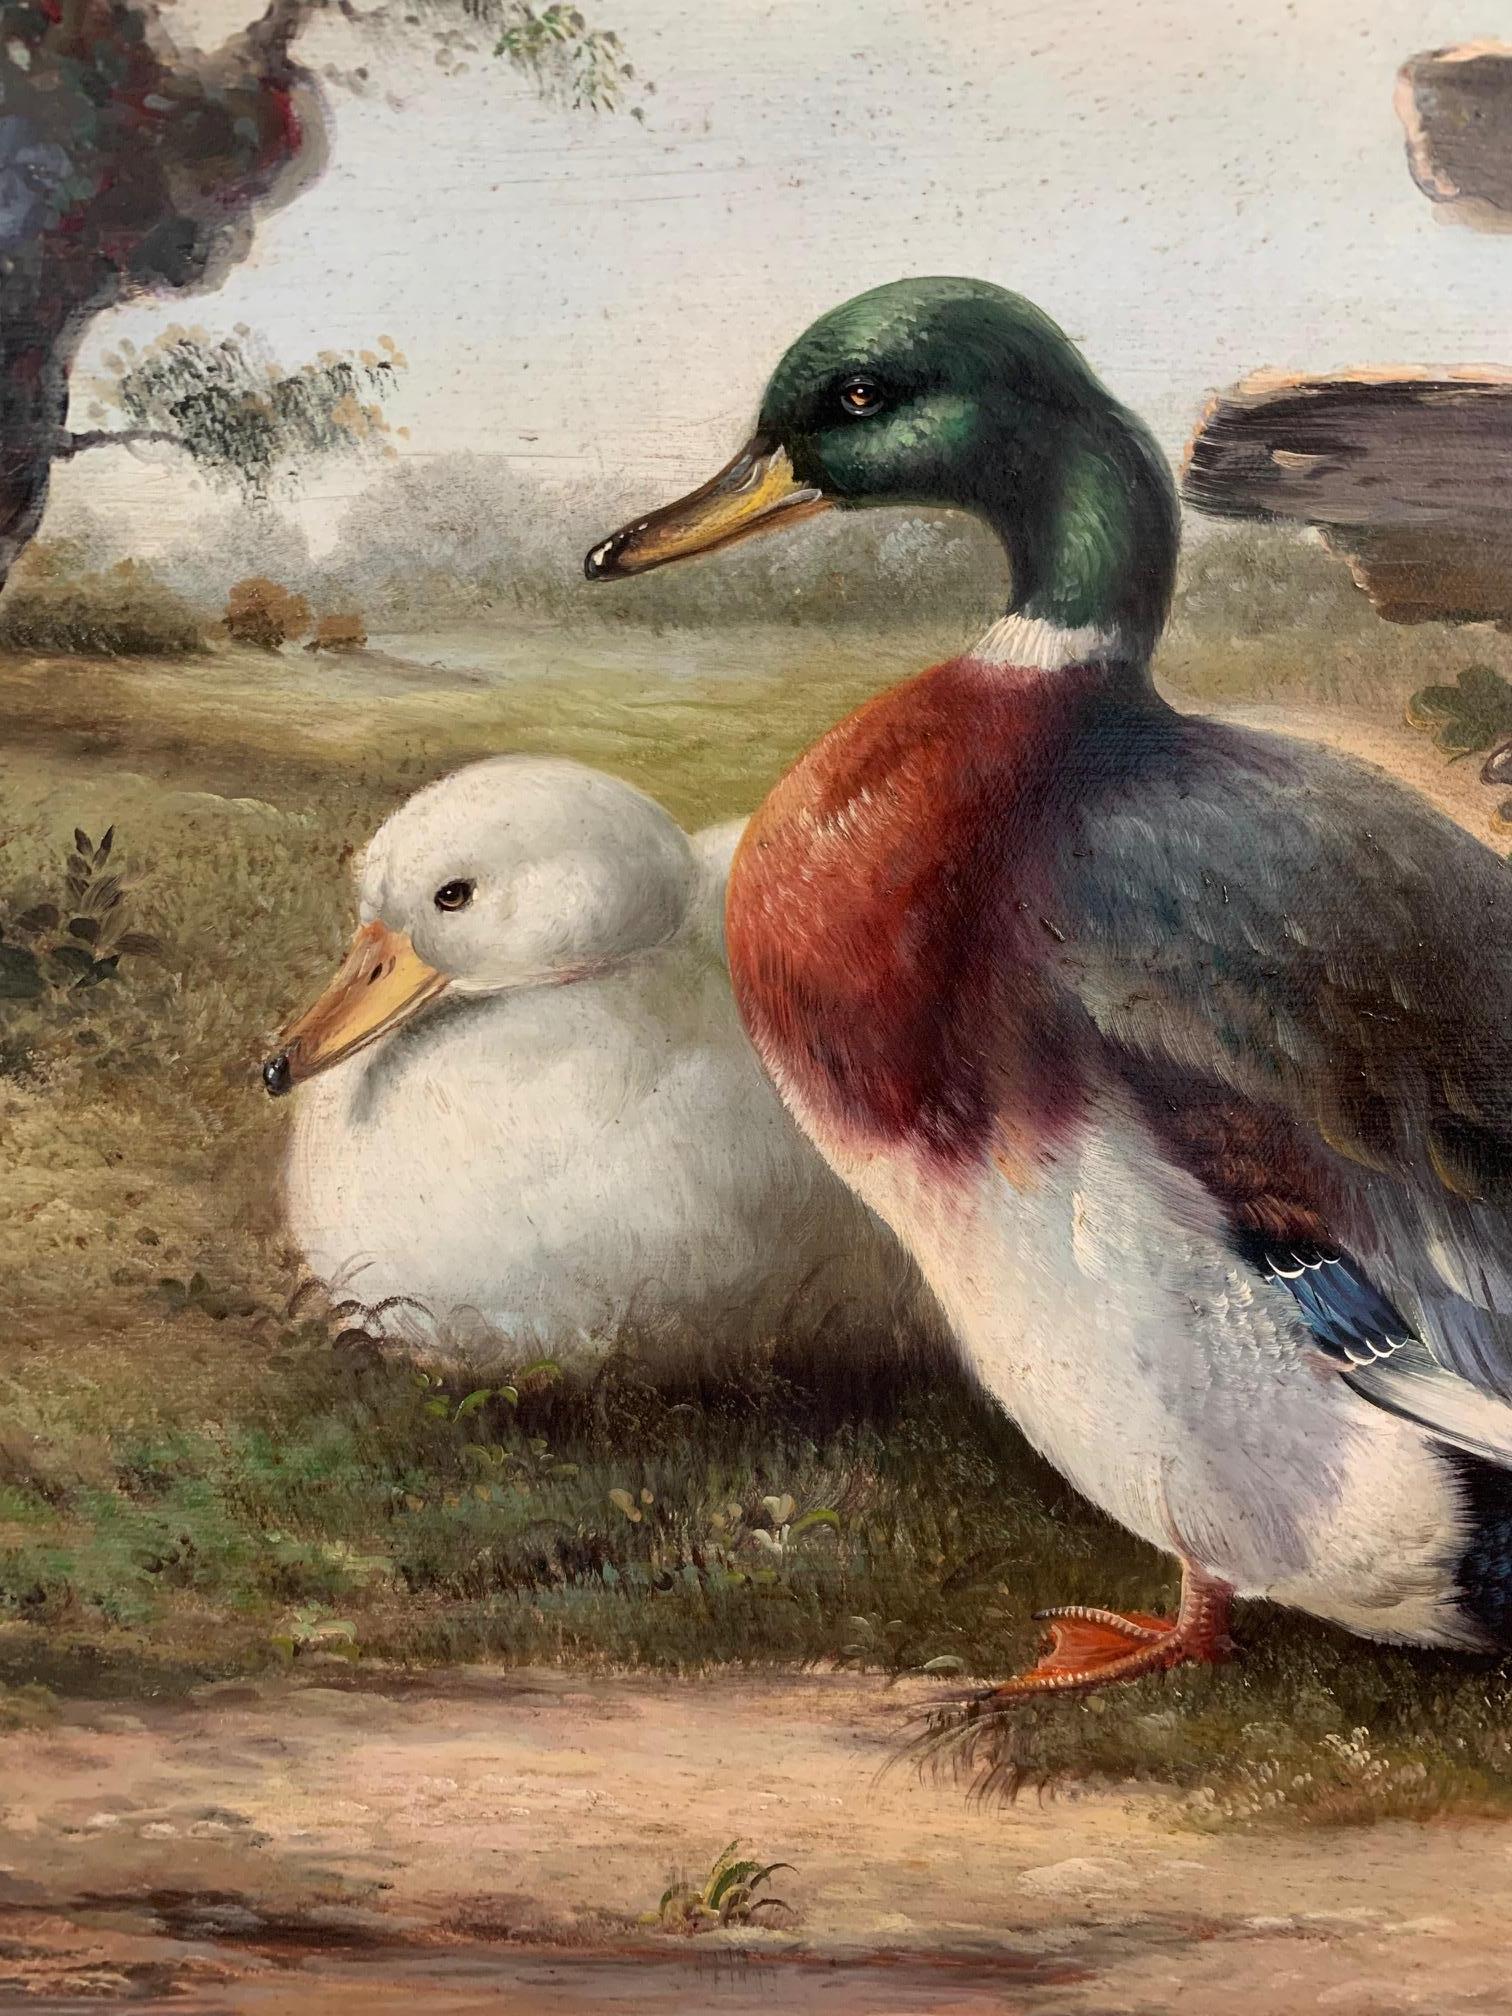 A gorgeous beautifully rendered old world style original oil on canvas of ducks by a river bank with moody sky.
Handsome giltwood frame.
Signed L. Roman

Measures: Framed 34” W x 30” H x 3” D
Canvas 24” W x 20” H x 3” D.